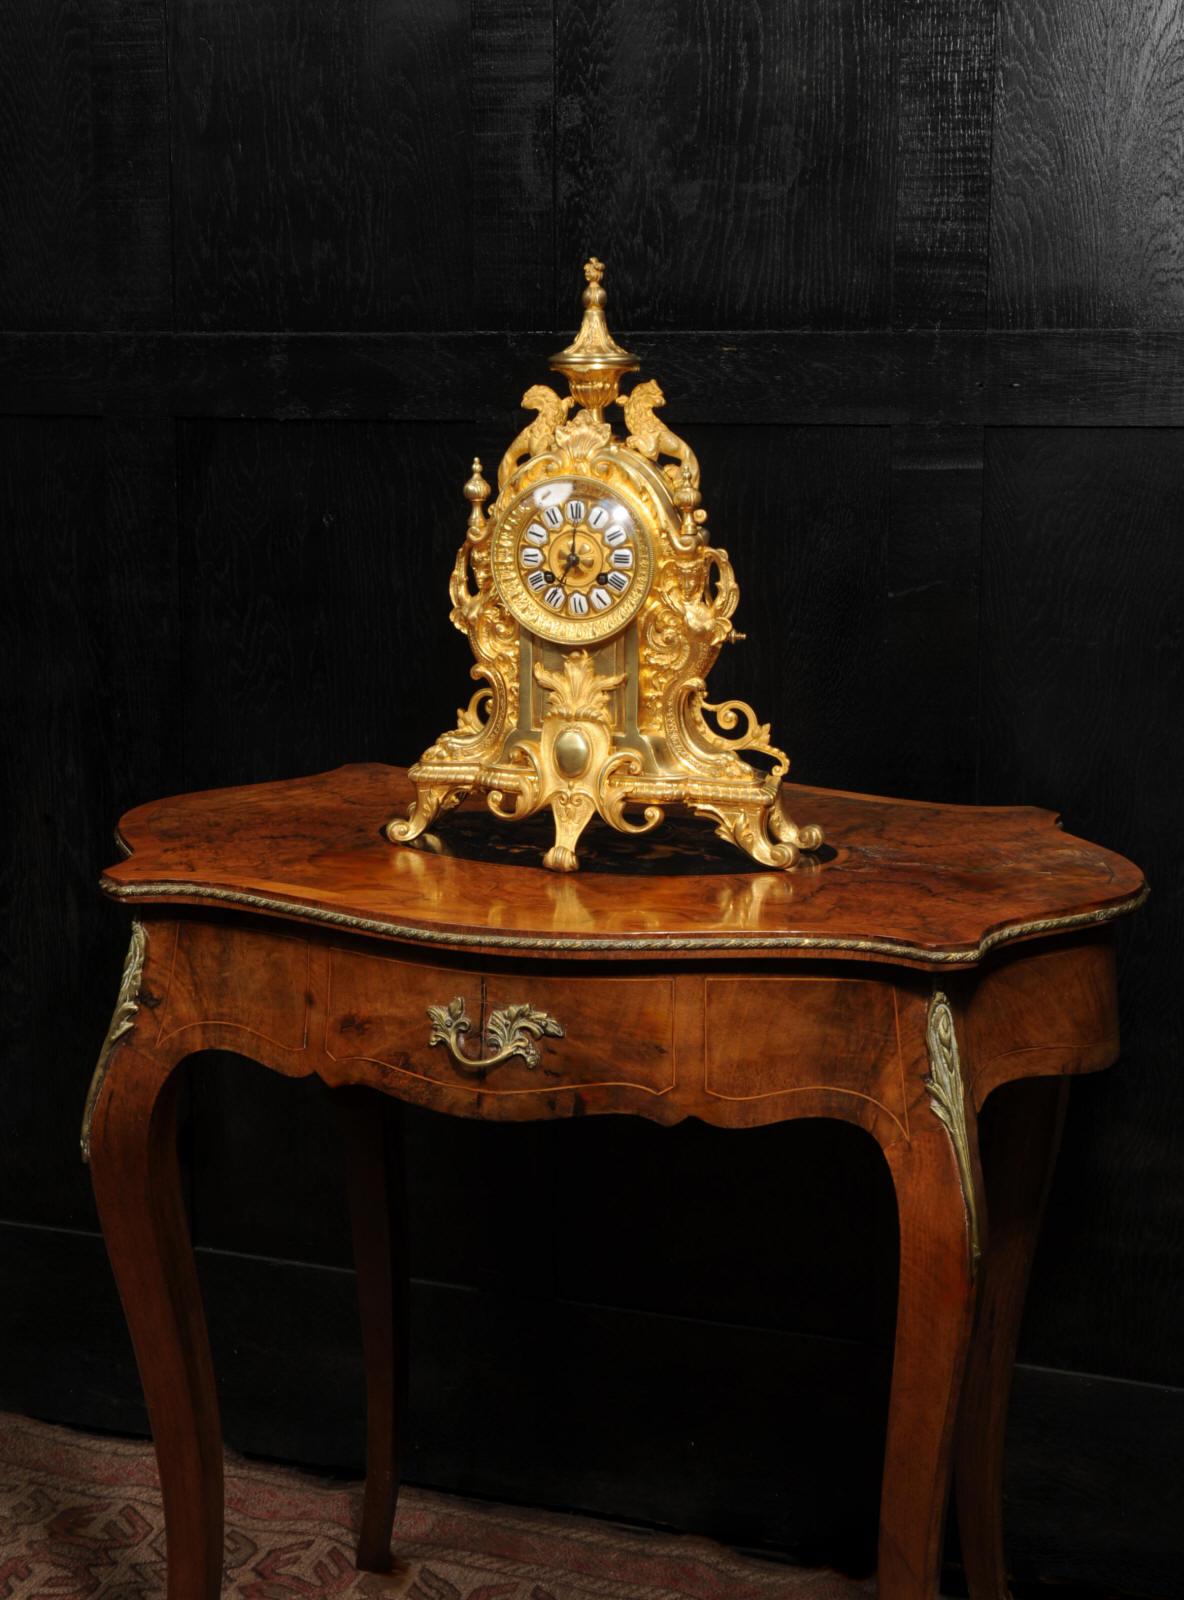 Antique French Ormolu Clock - Lions Rampant - overhauled and tested For Sale 2